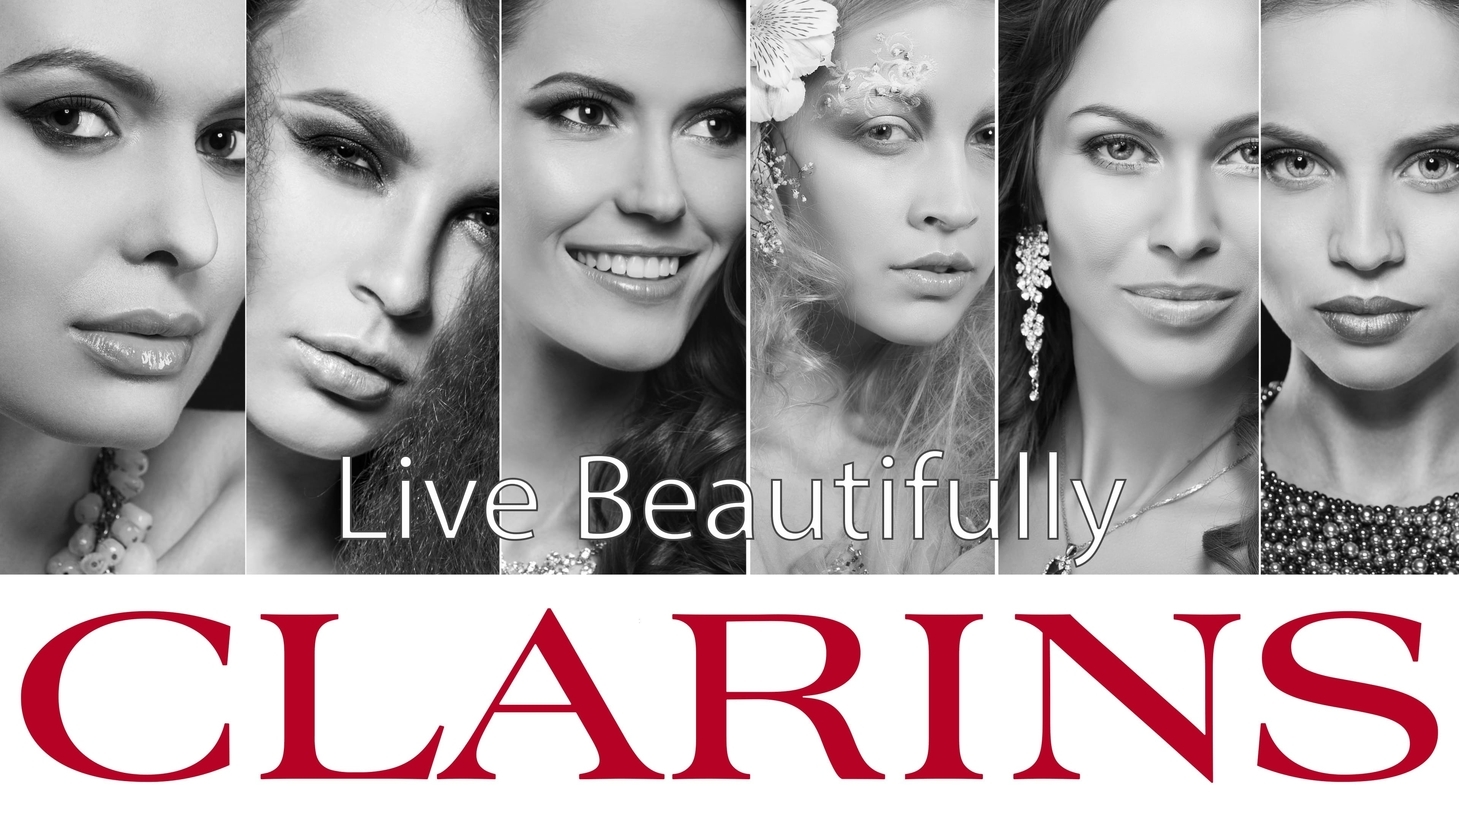 Clarins new live beautifully campaign